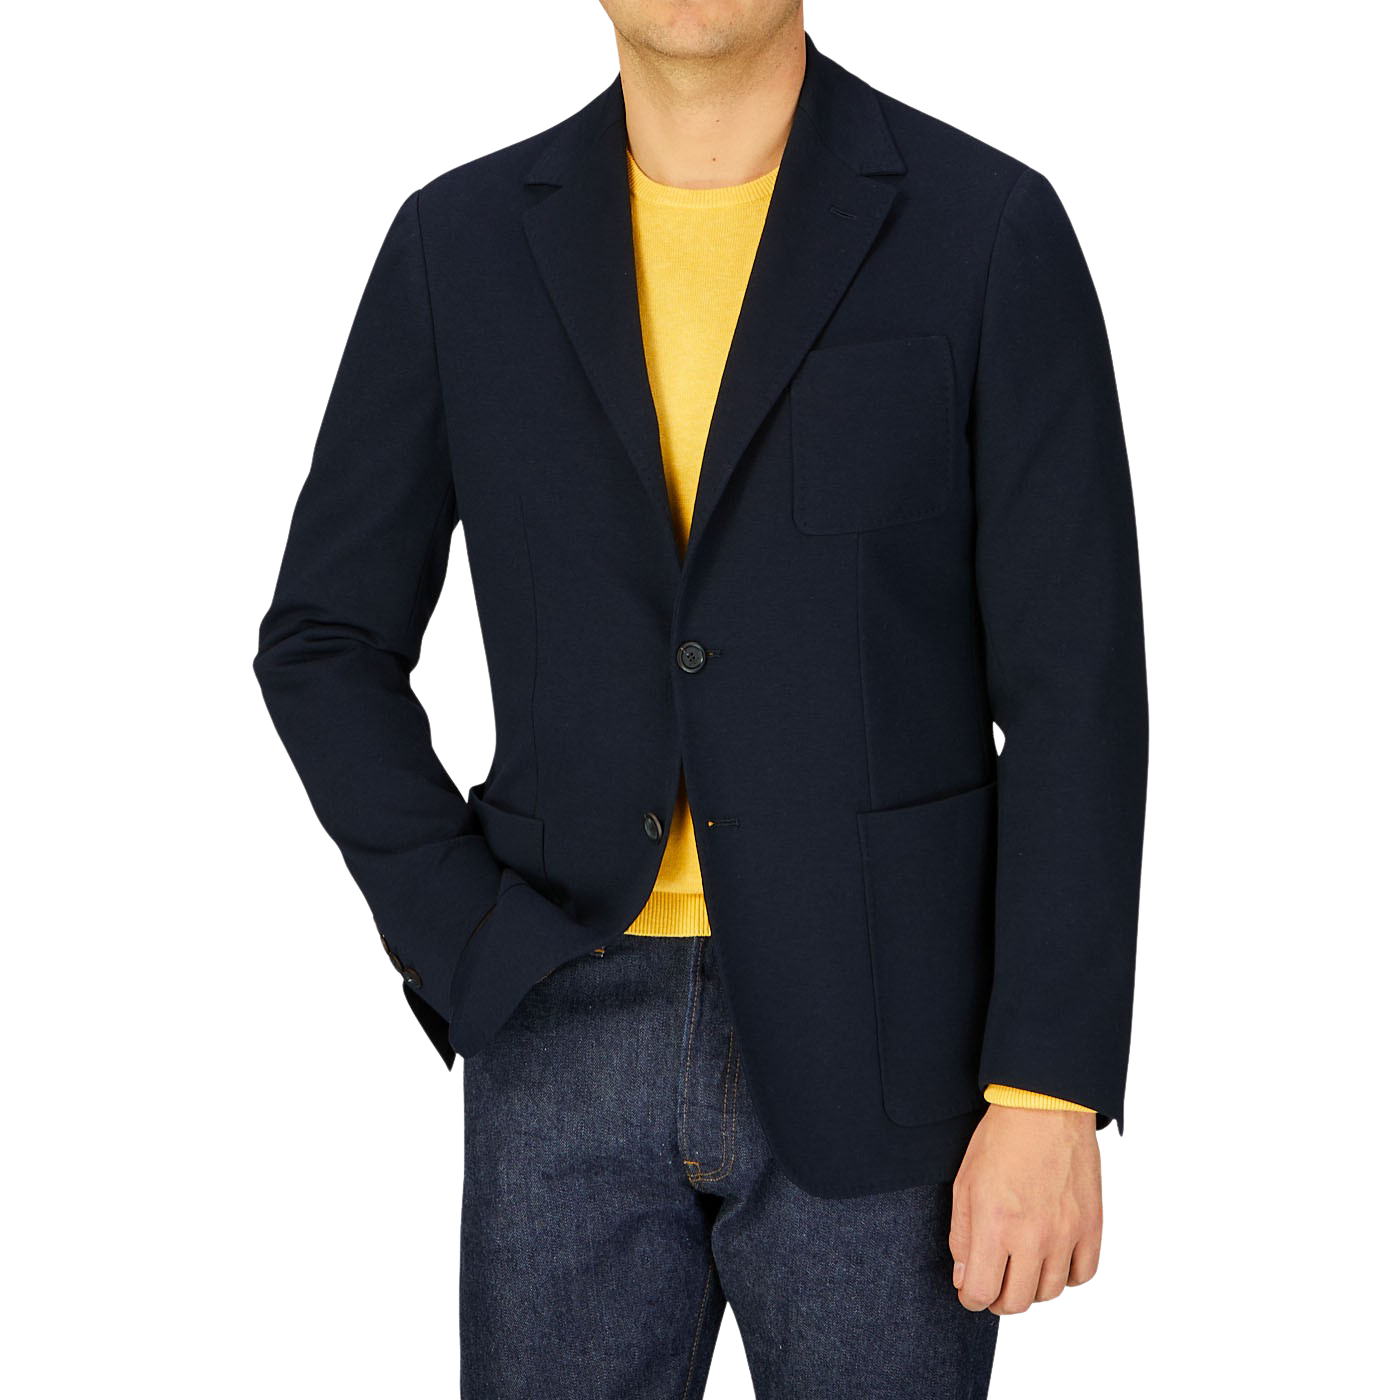 Man wearing a Canali navy cotton jersey unconstructed blazer over a yellow shirt paired with blue jeans.